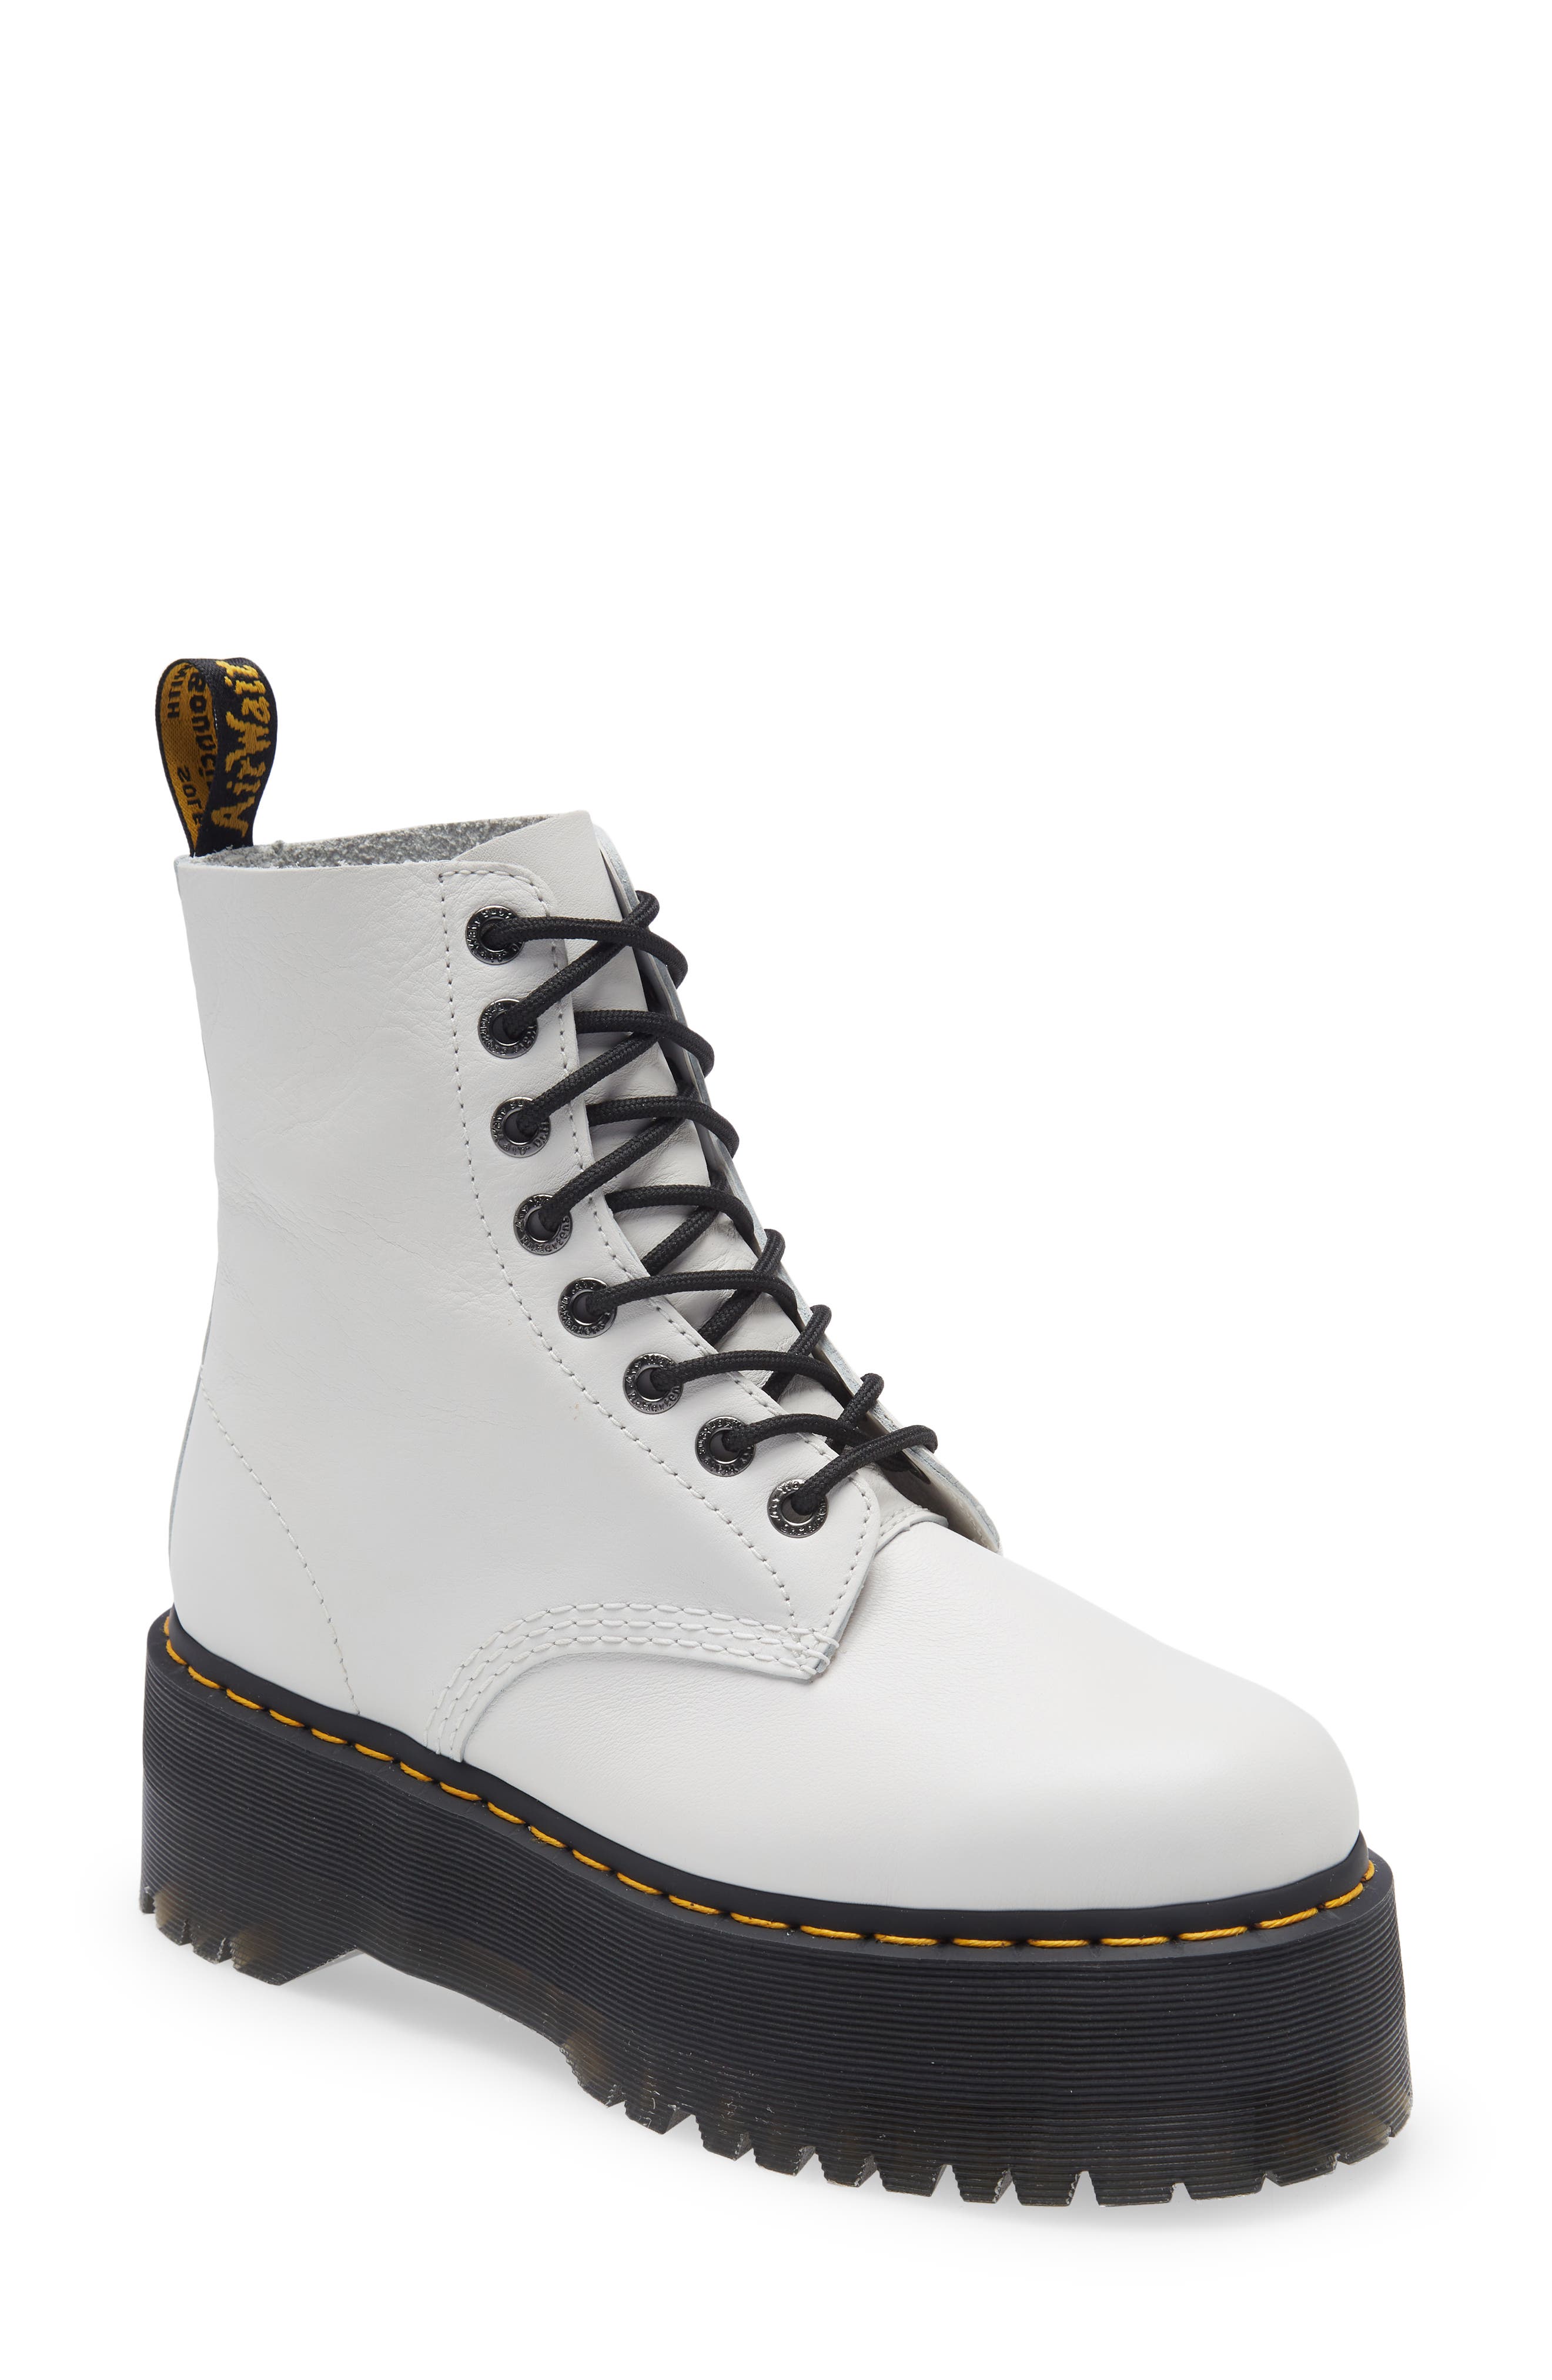 Dr. Martens 1460 Pascal Max Boot in Optical White at Nordstrom